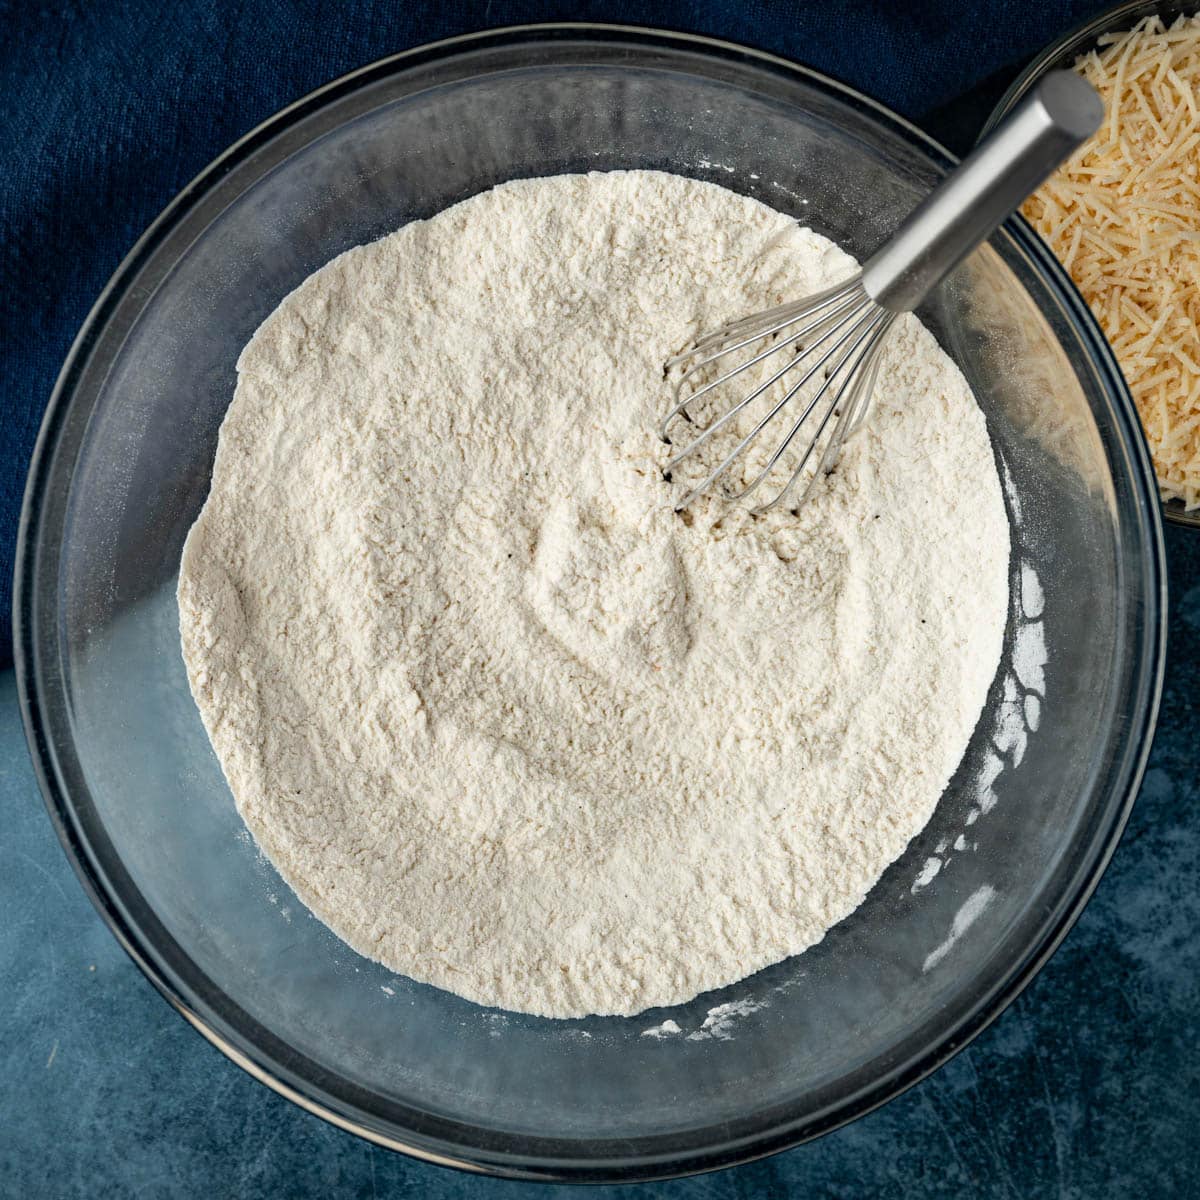 dry ingredients for bread in a bowl